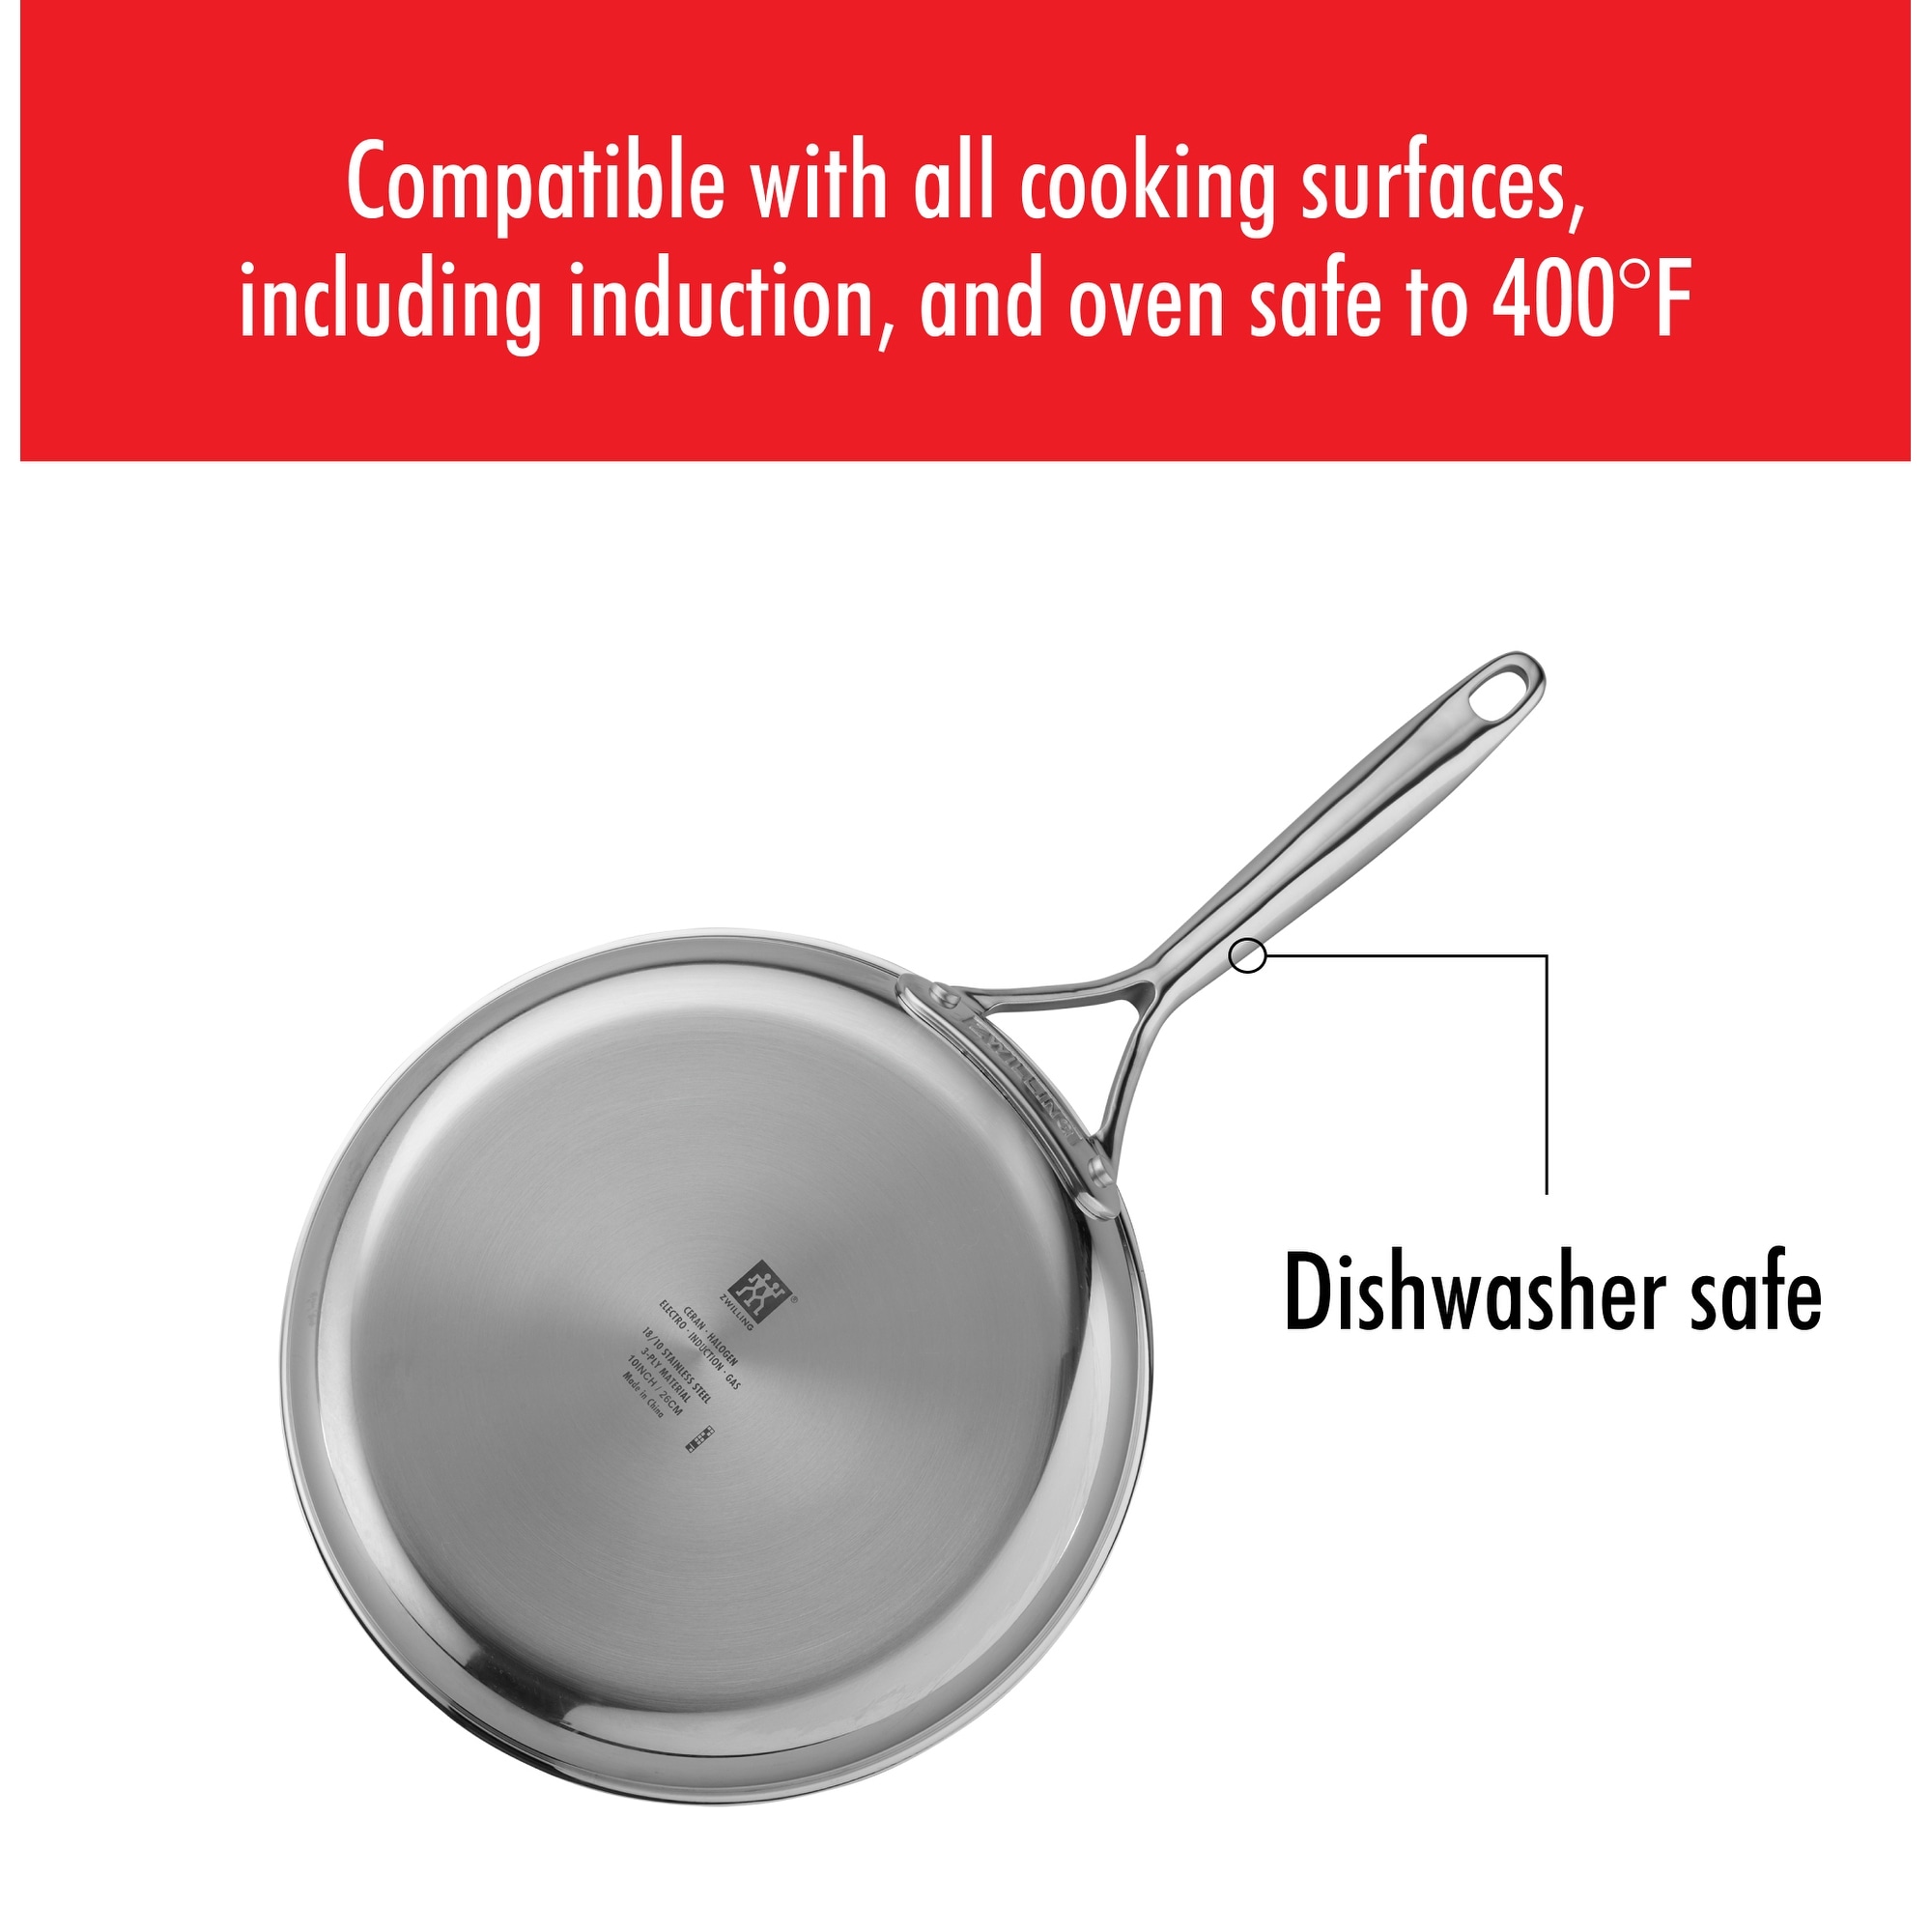 ZWILLING Energy Plus 8-inch, 18/10 Stainless Steel, Non-stick, Frying pan